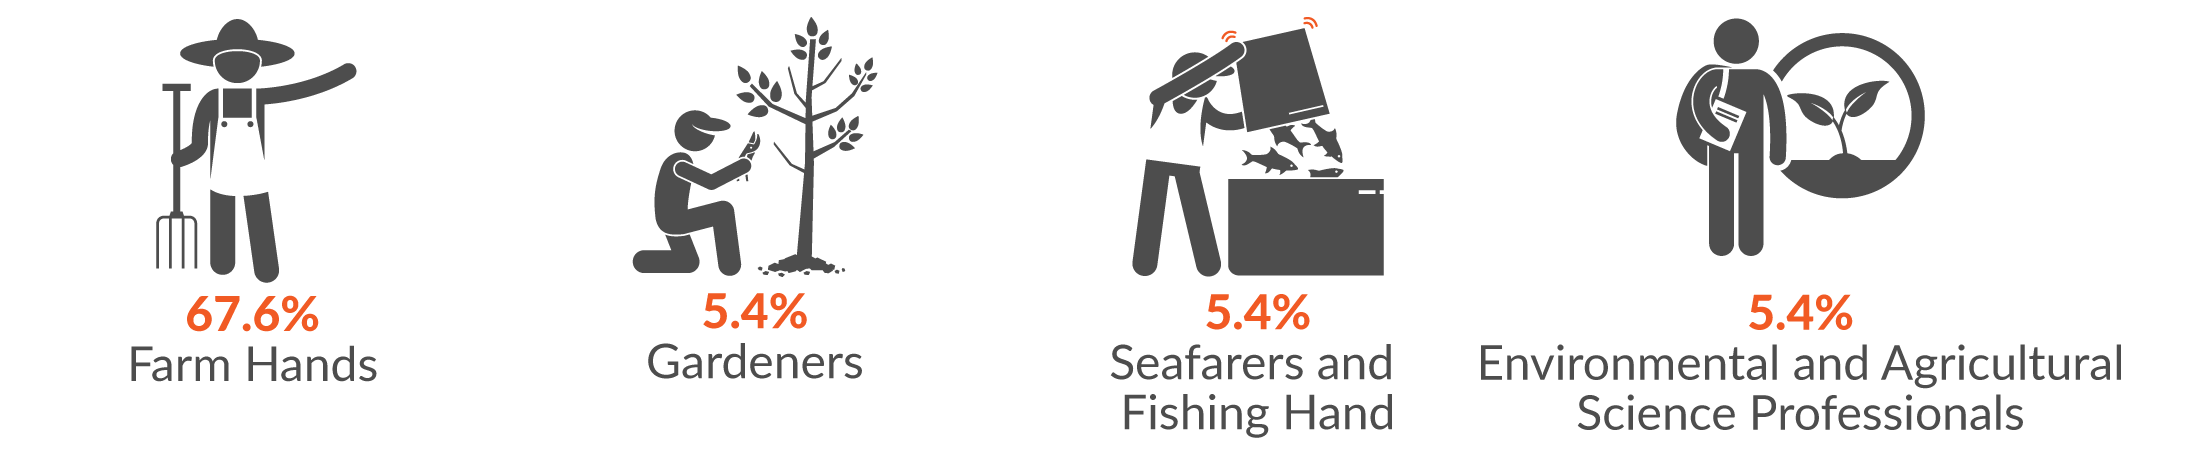 This infographic shows the main occupations by serious injury claims. 67.6% of Agriculture, forestry and fishing serious injury claims were made by a Farm Hand.